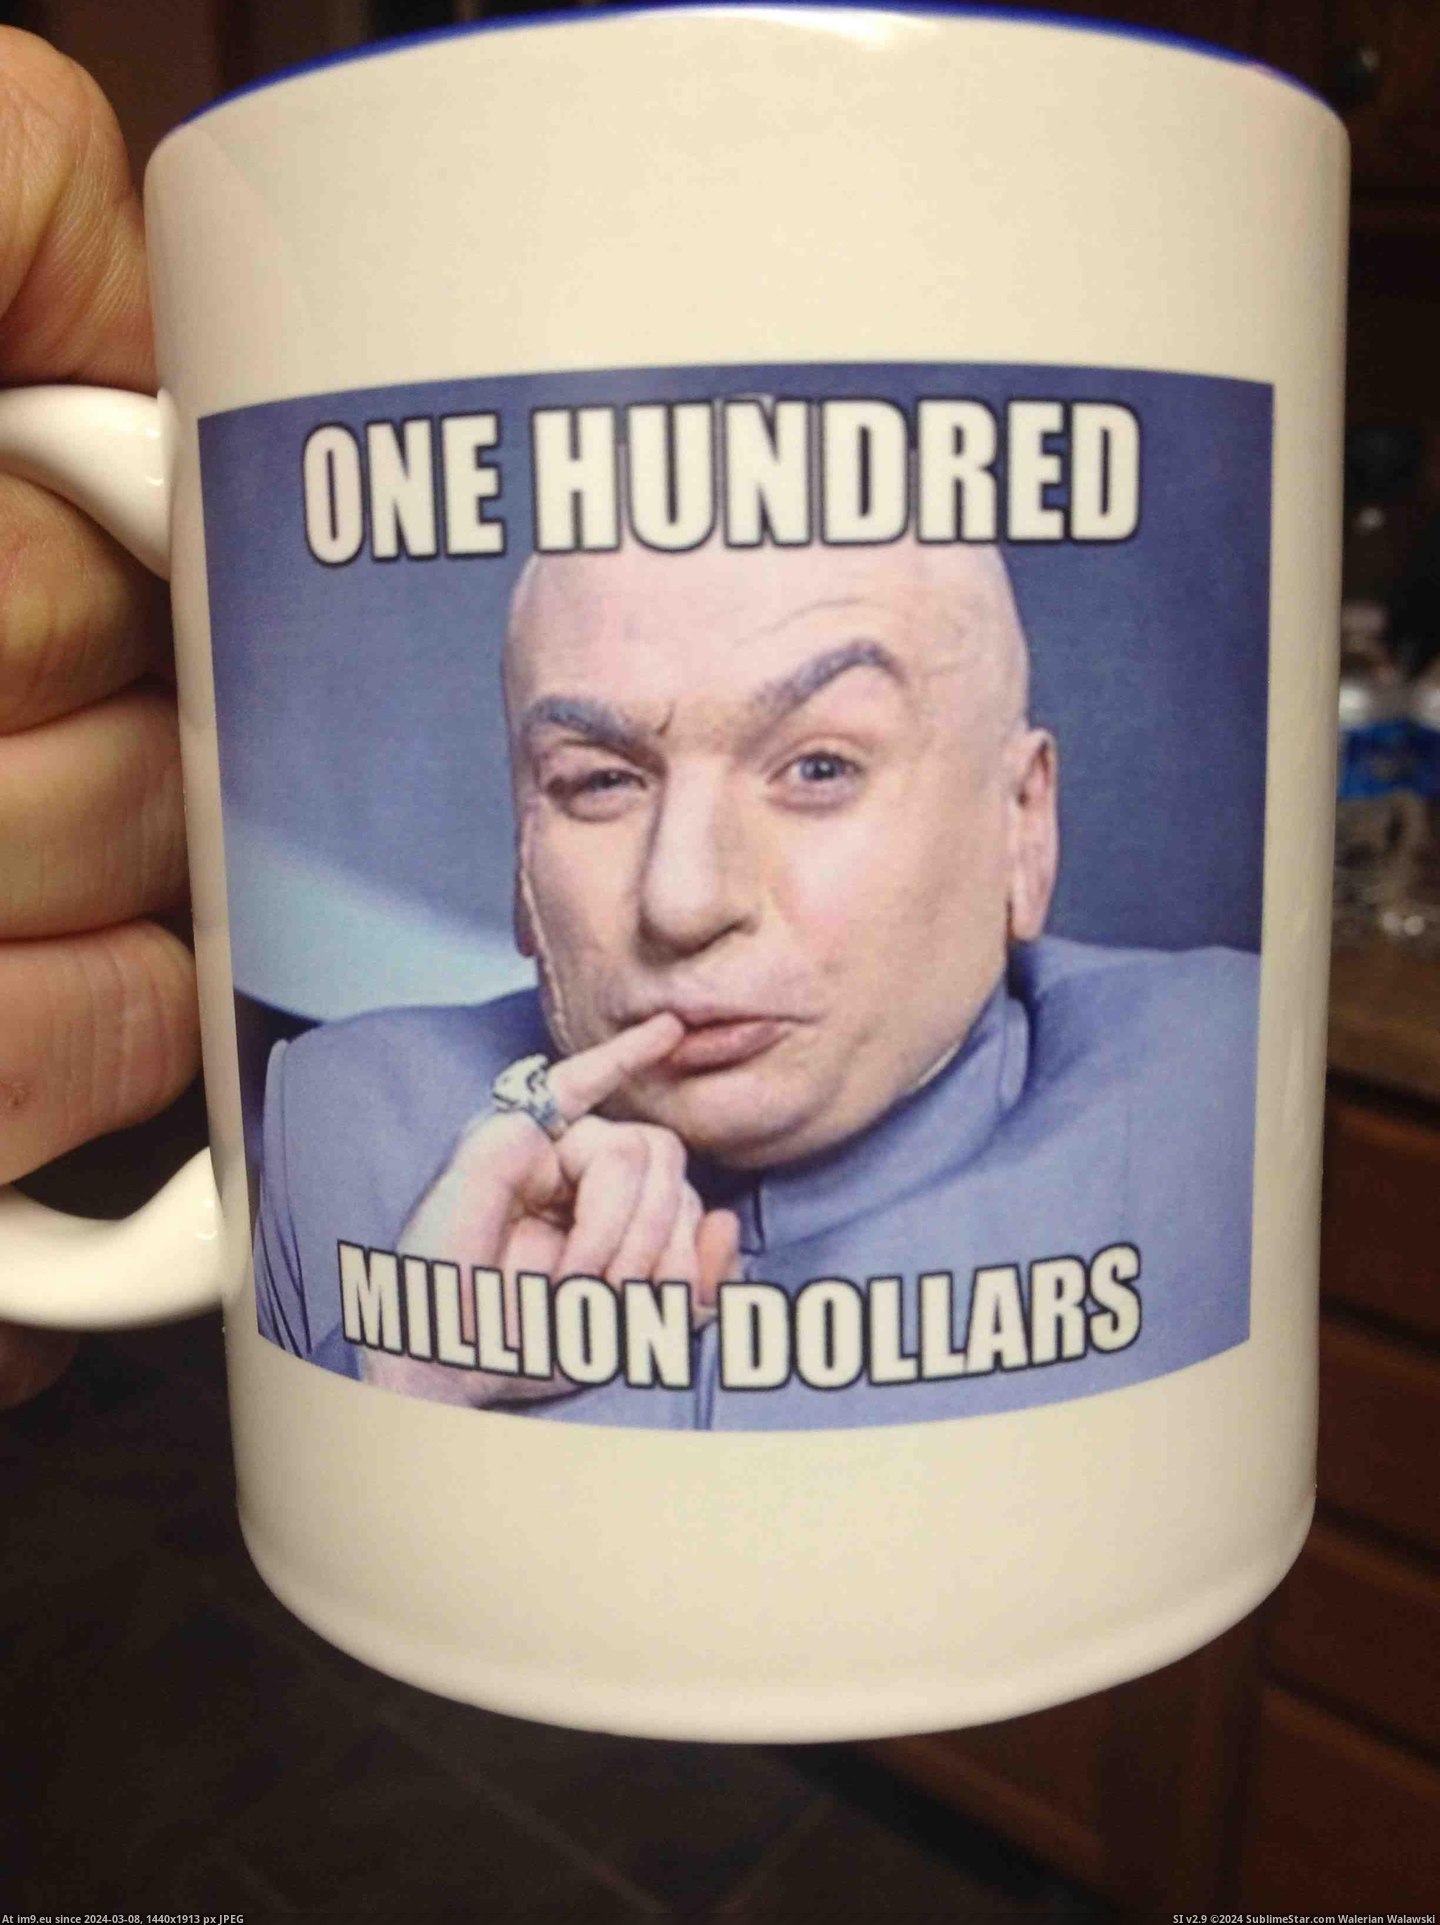 #Funny #Year #Dad #Works #Important #Sales #Mugs #Milestone #Gave #Reached #Company #Celebrate [Funny] The company my dad works for reached an important milestone last year for sales. They gave out mugs to celebrate. Pic. (Bild von album My r/FUNNY favs))